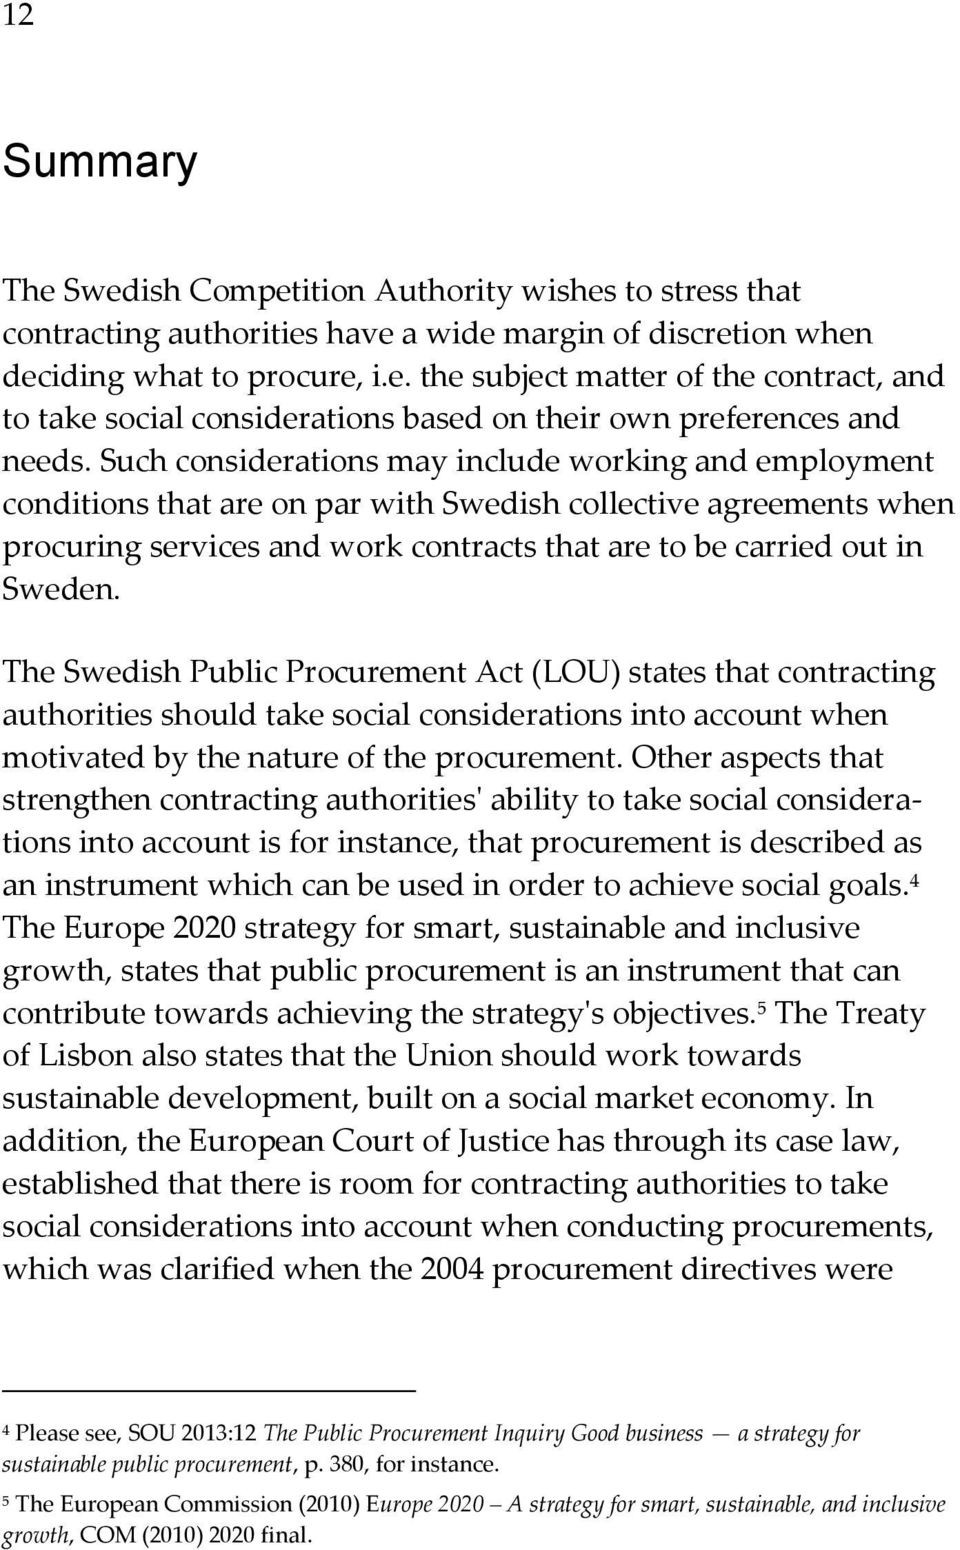 The Swedish Public Procurement Act (LOU) states that contracting authorities should take social considerations into account when motivated by the nature of the procurement.